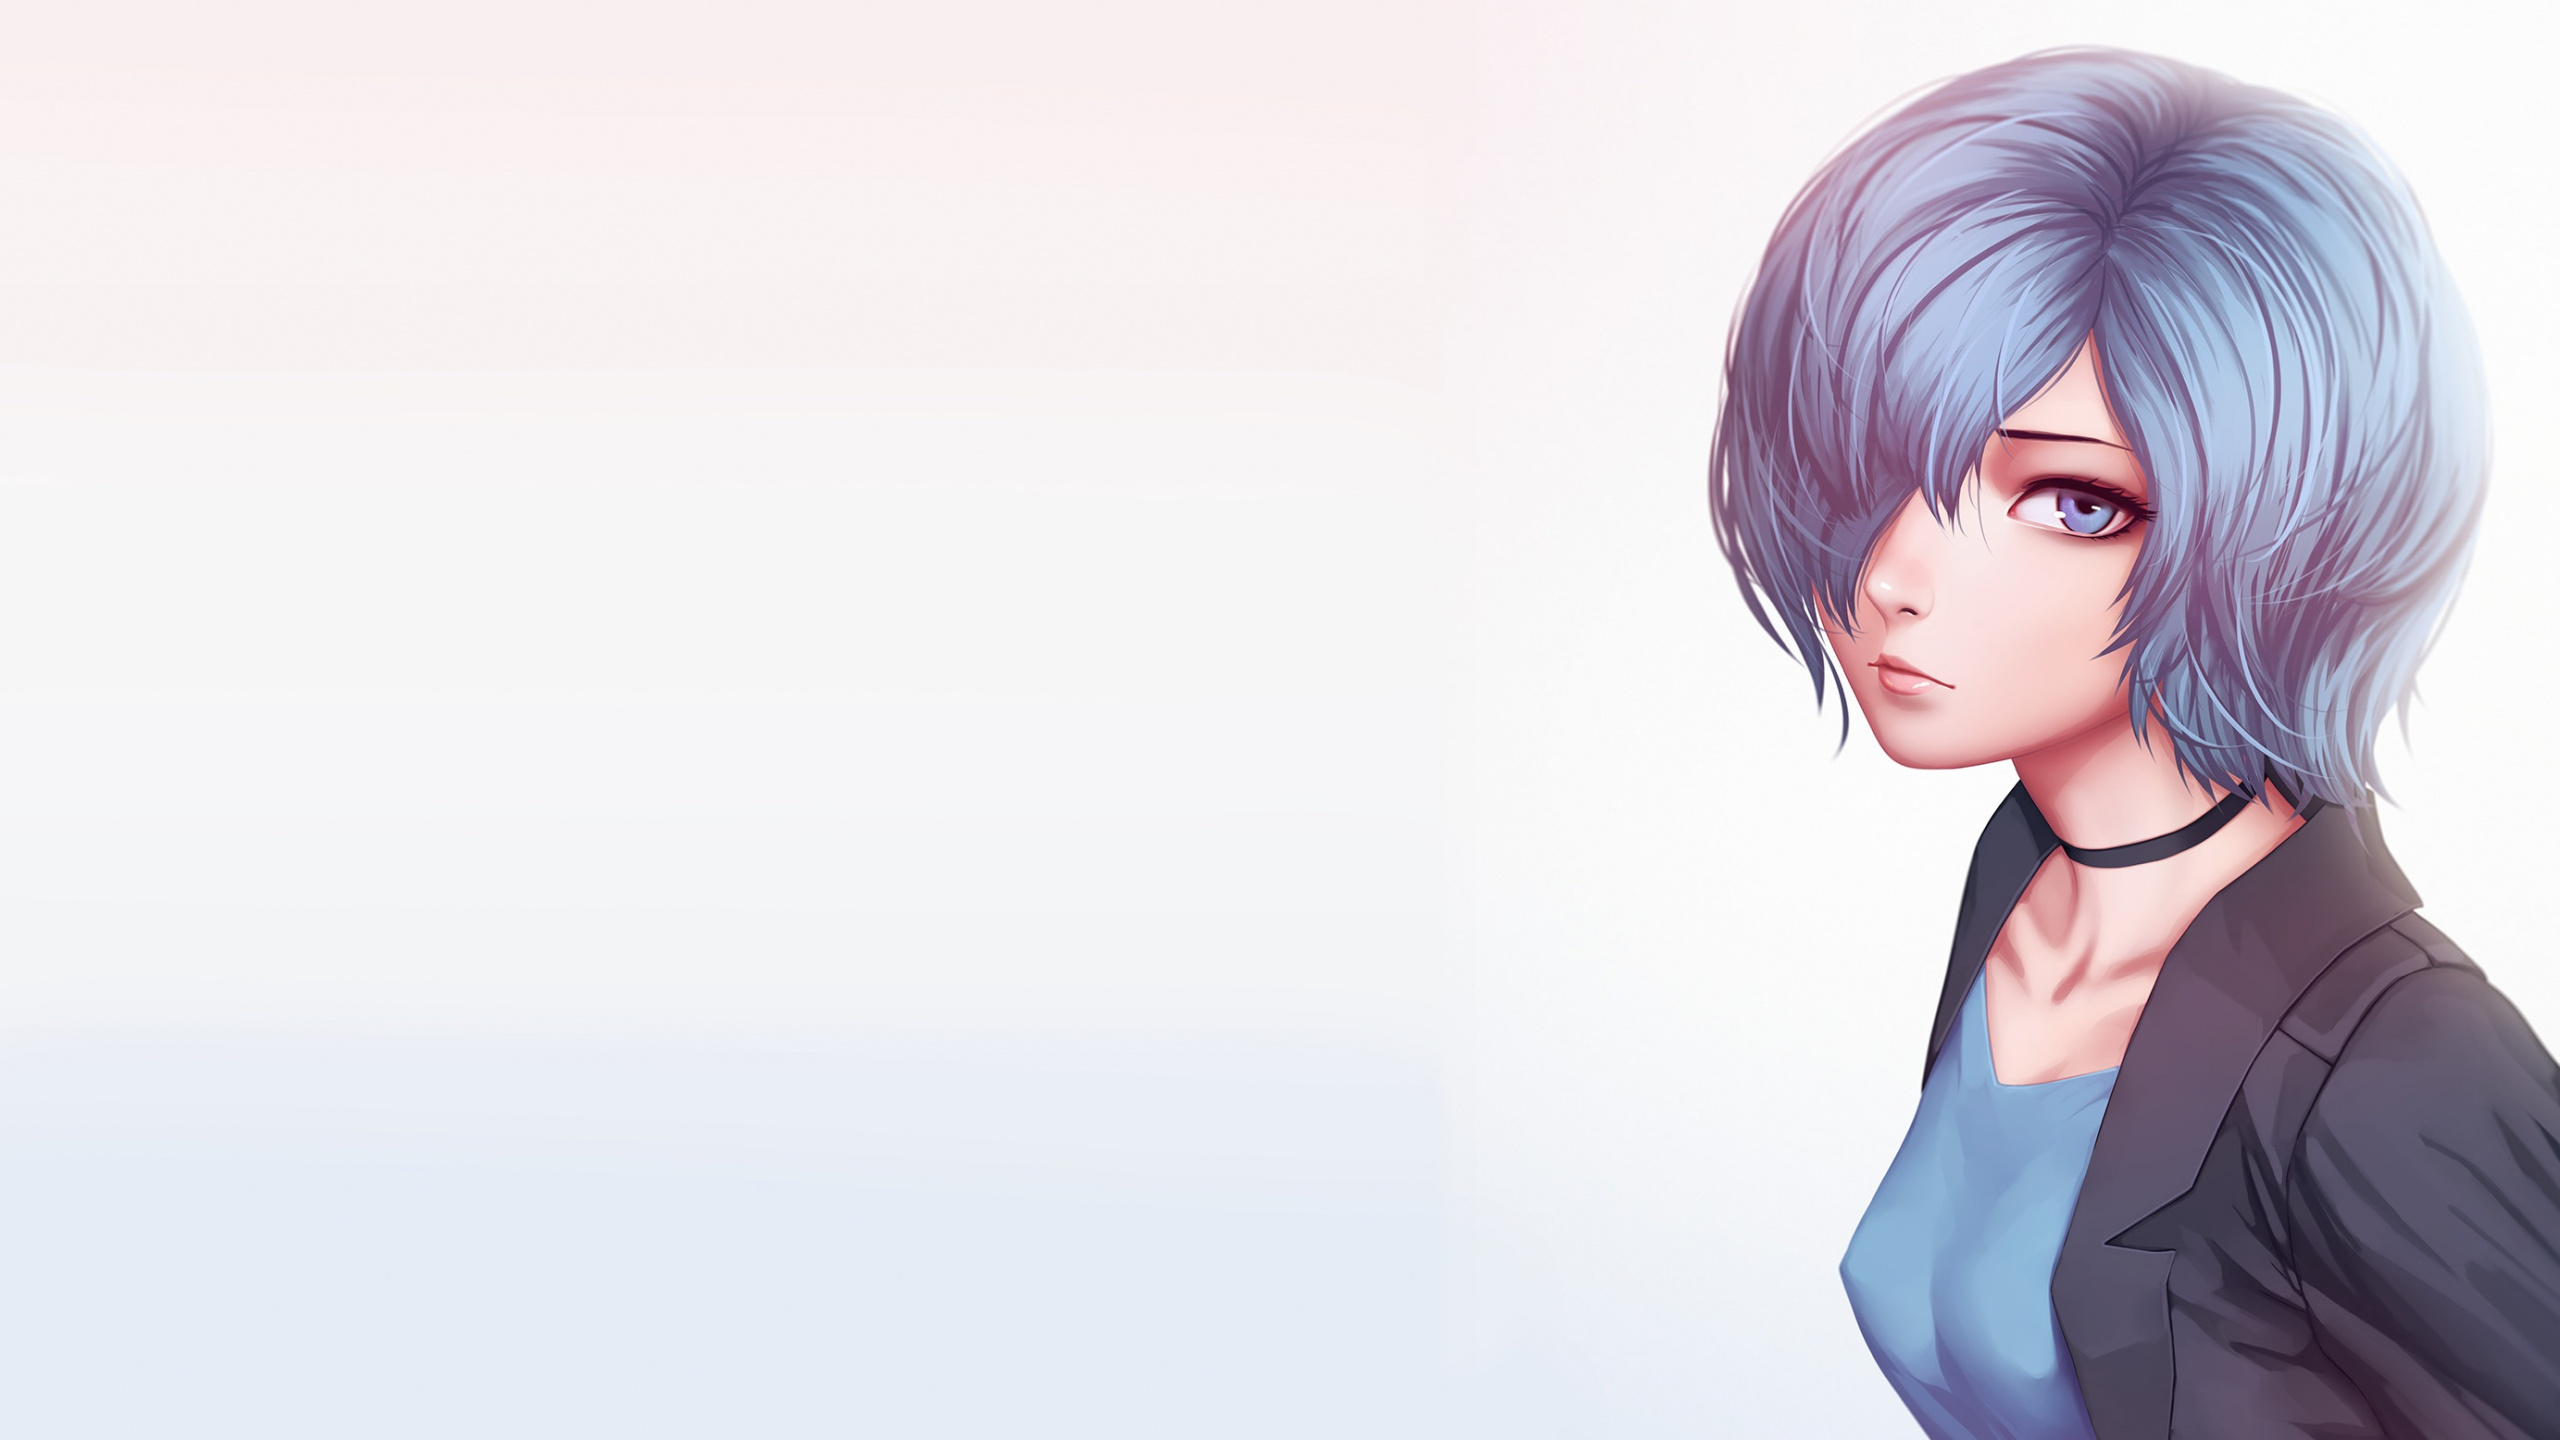 Femme en Chemise Bleue Personnage Anime. Wallpaper in 2560x1440 Resolution